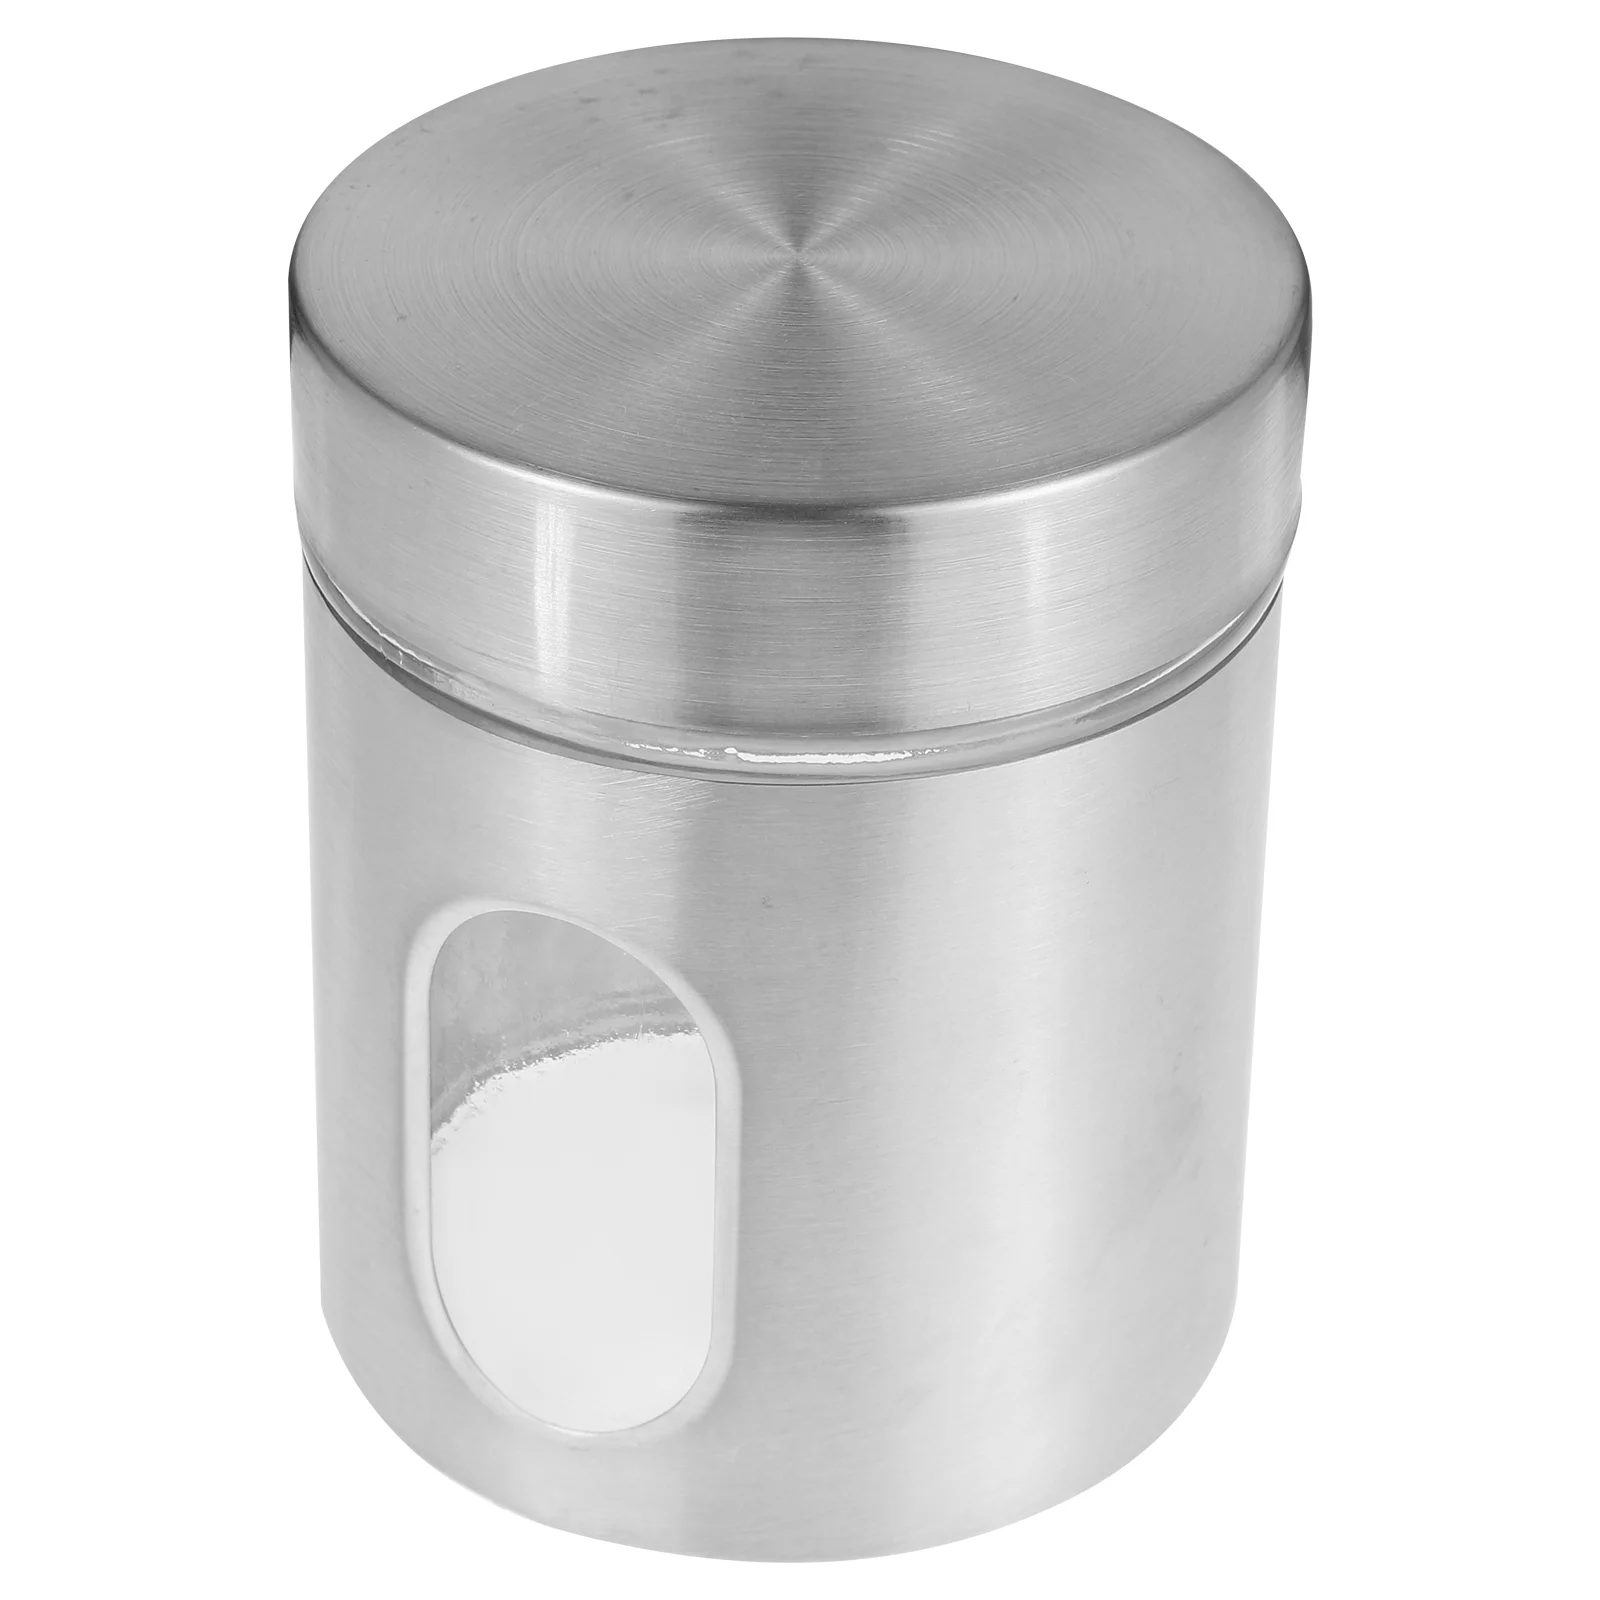 

Tea Storage Jar Tin Container Stainless Steel Kitchen Canister Metal Containers Flour Sugar Coffee Cookie Bean Leaf Can Airtight